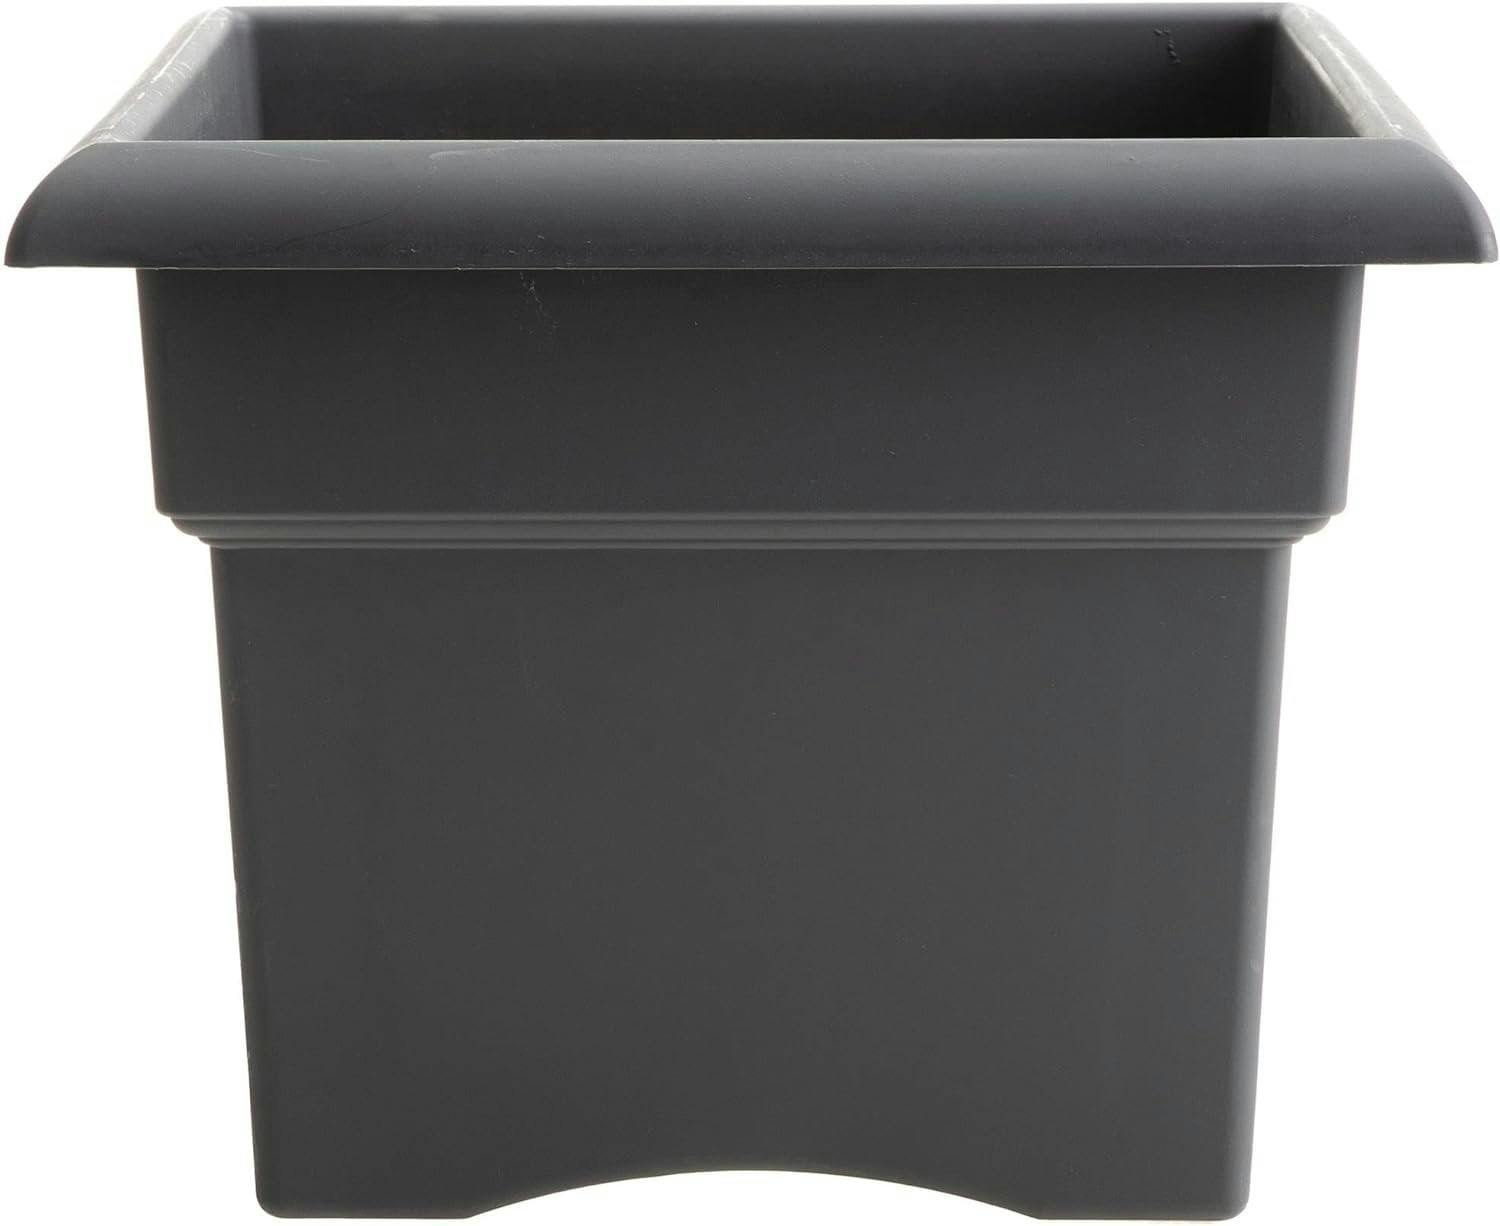 Charcoal Gray 18" Square Deck Box Planter with Drainage Holes